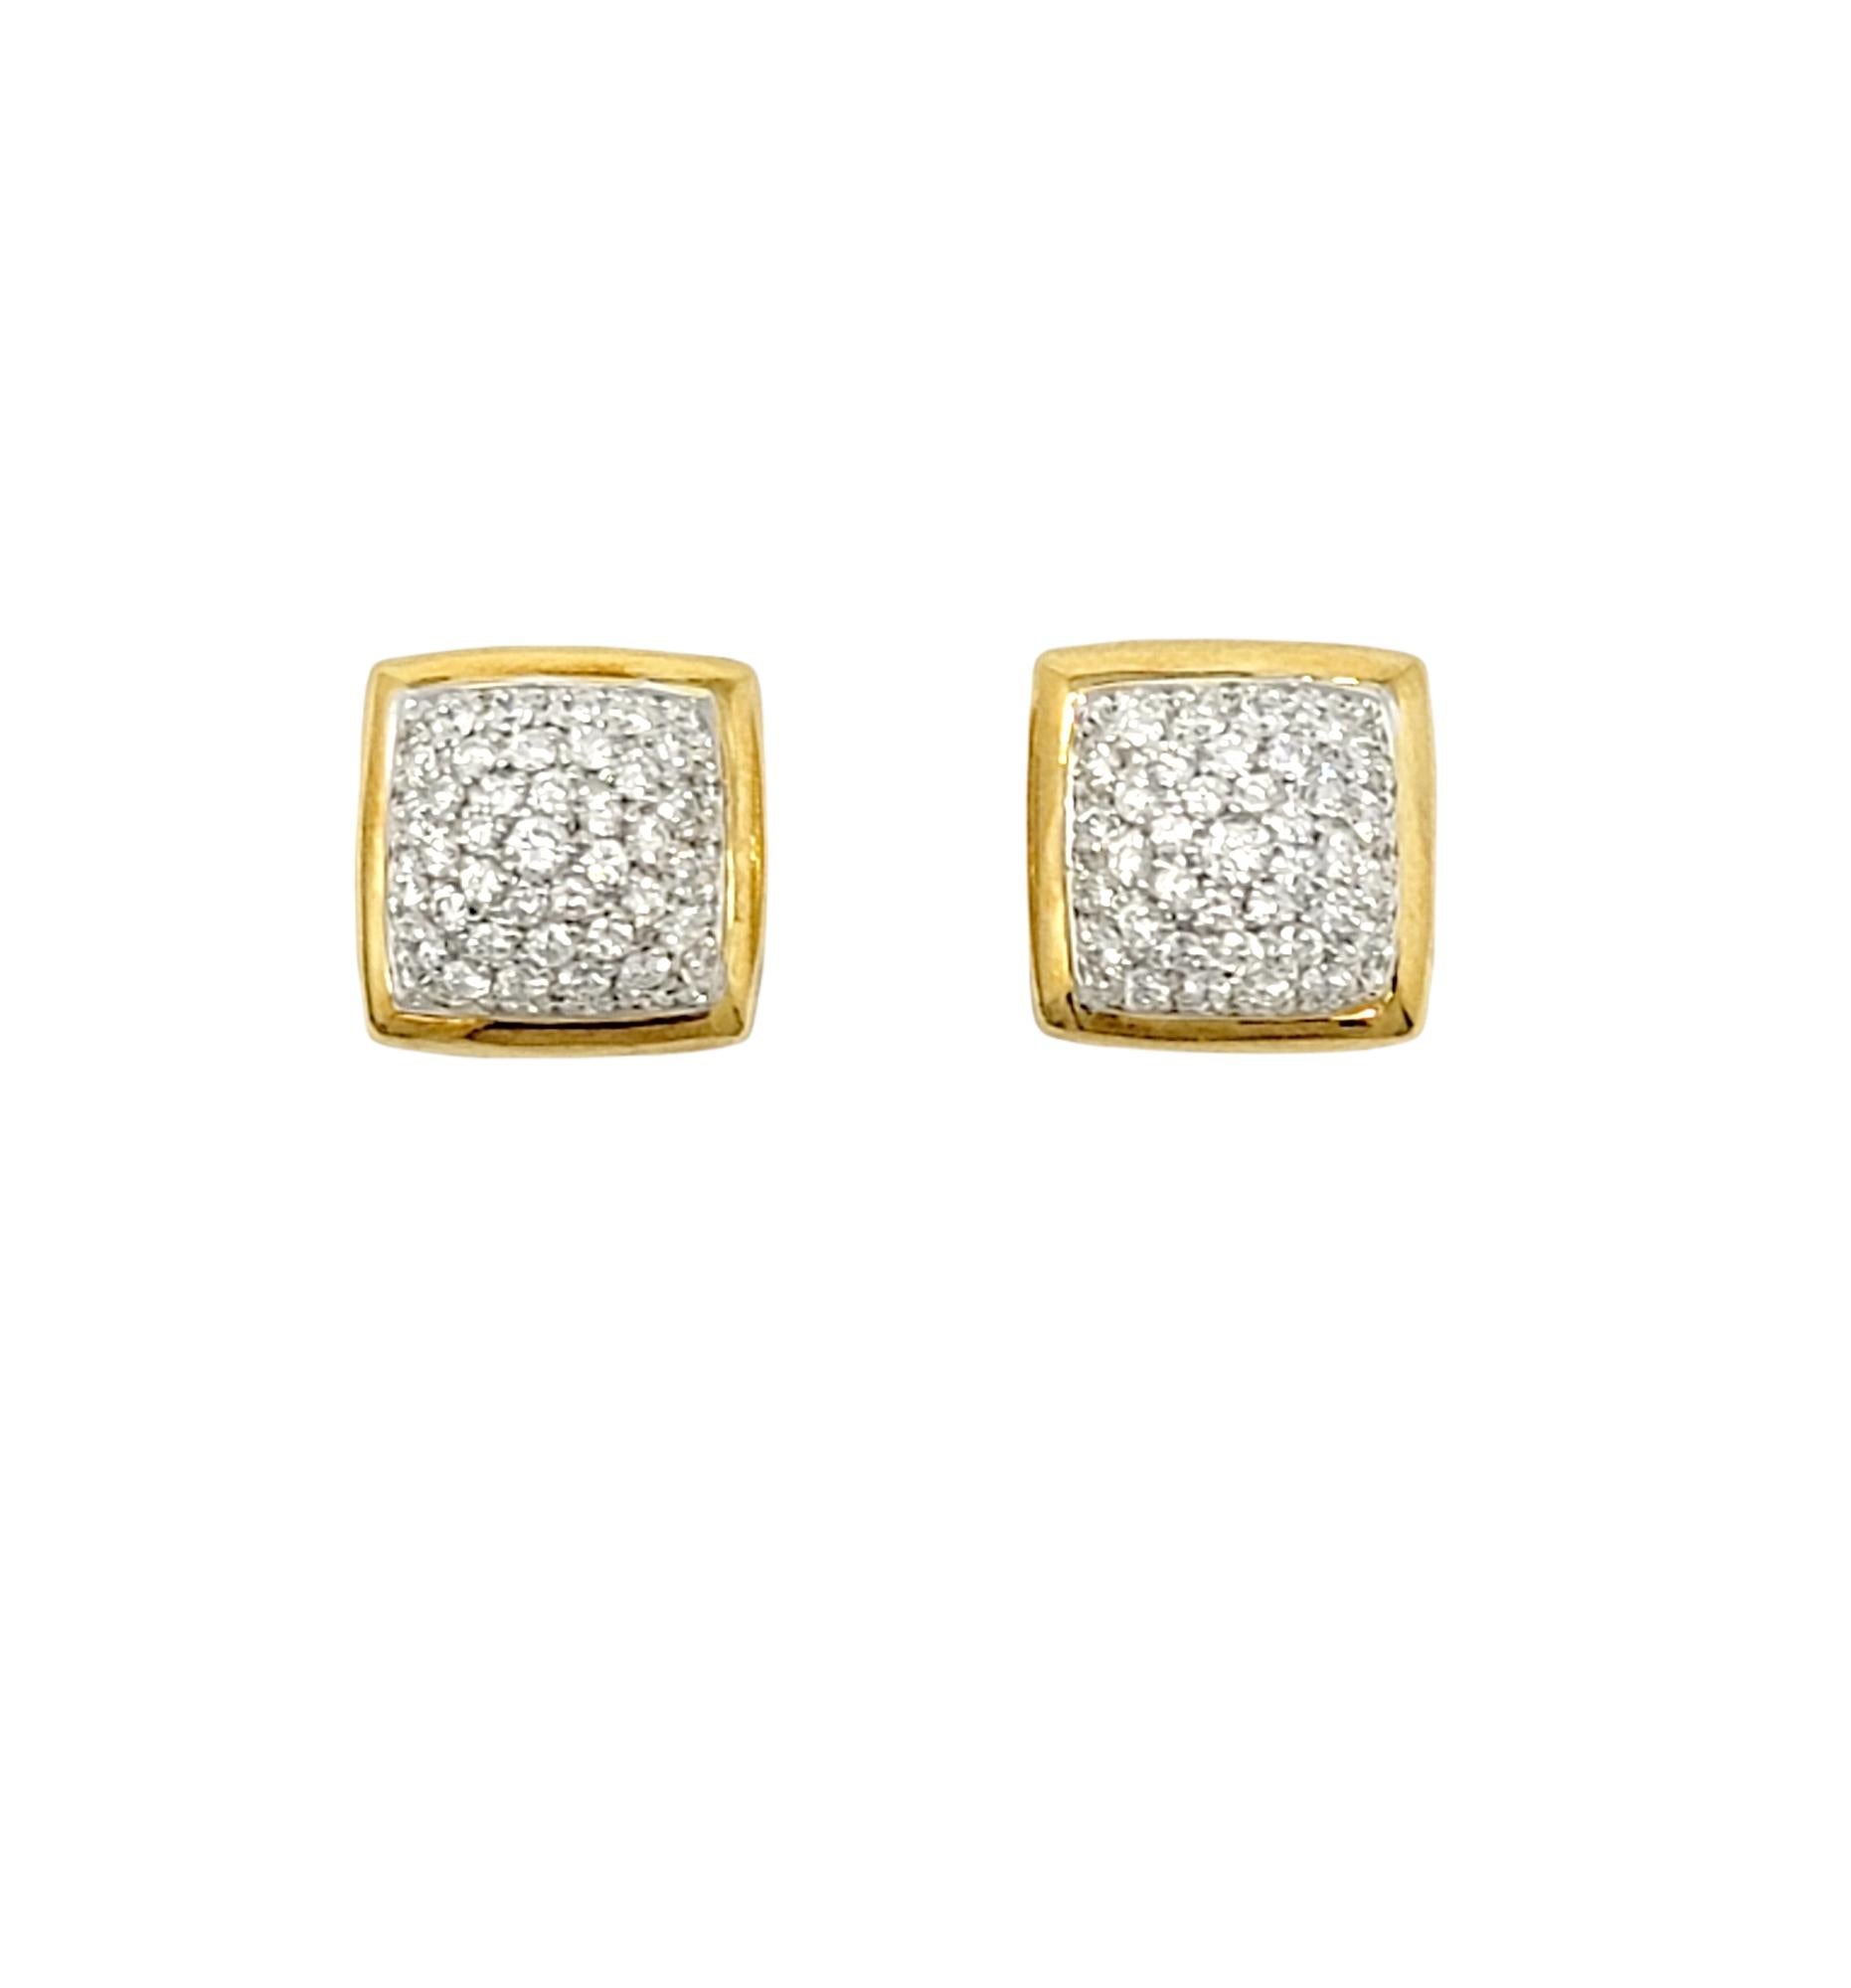 Stunningly sparkly pave diamond stud earrings. These simple yet elegant earrings are bursting with glittering diamonds and give off a modern sophistication. They feature a square shaped base in polished 18 karat yellow gold, and are filled with